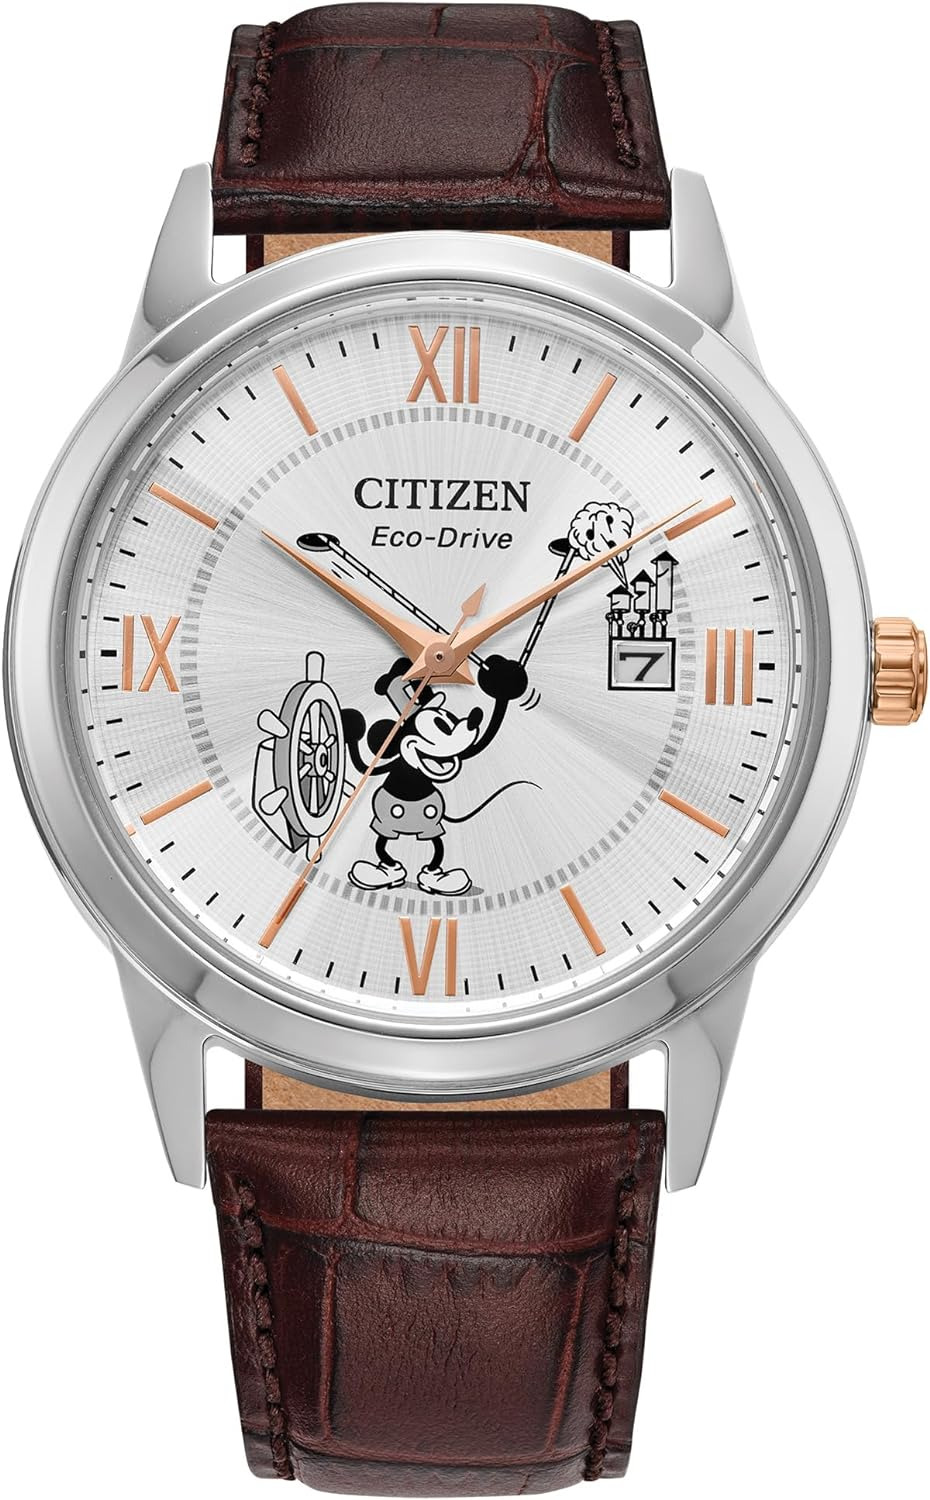 Citizen Eco-Drive Disney Steamboat Willie Mickey Mouse Stainless Steel Case Watc